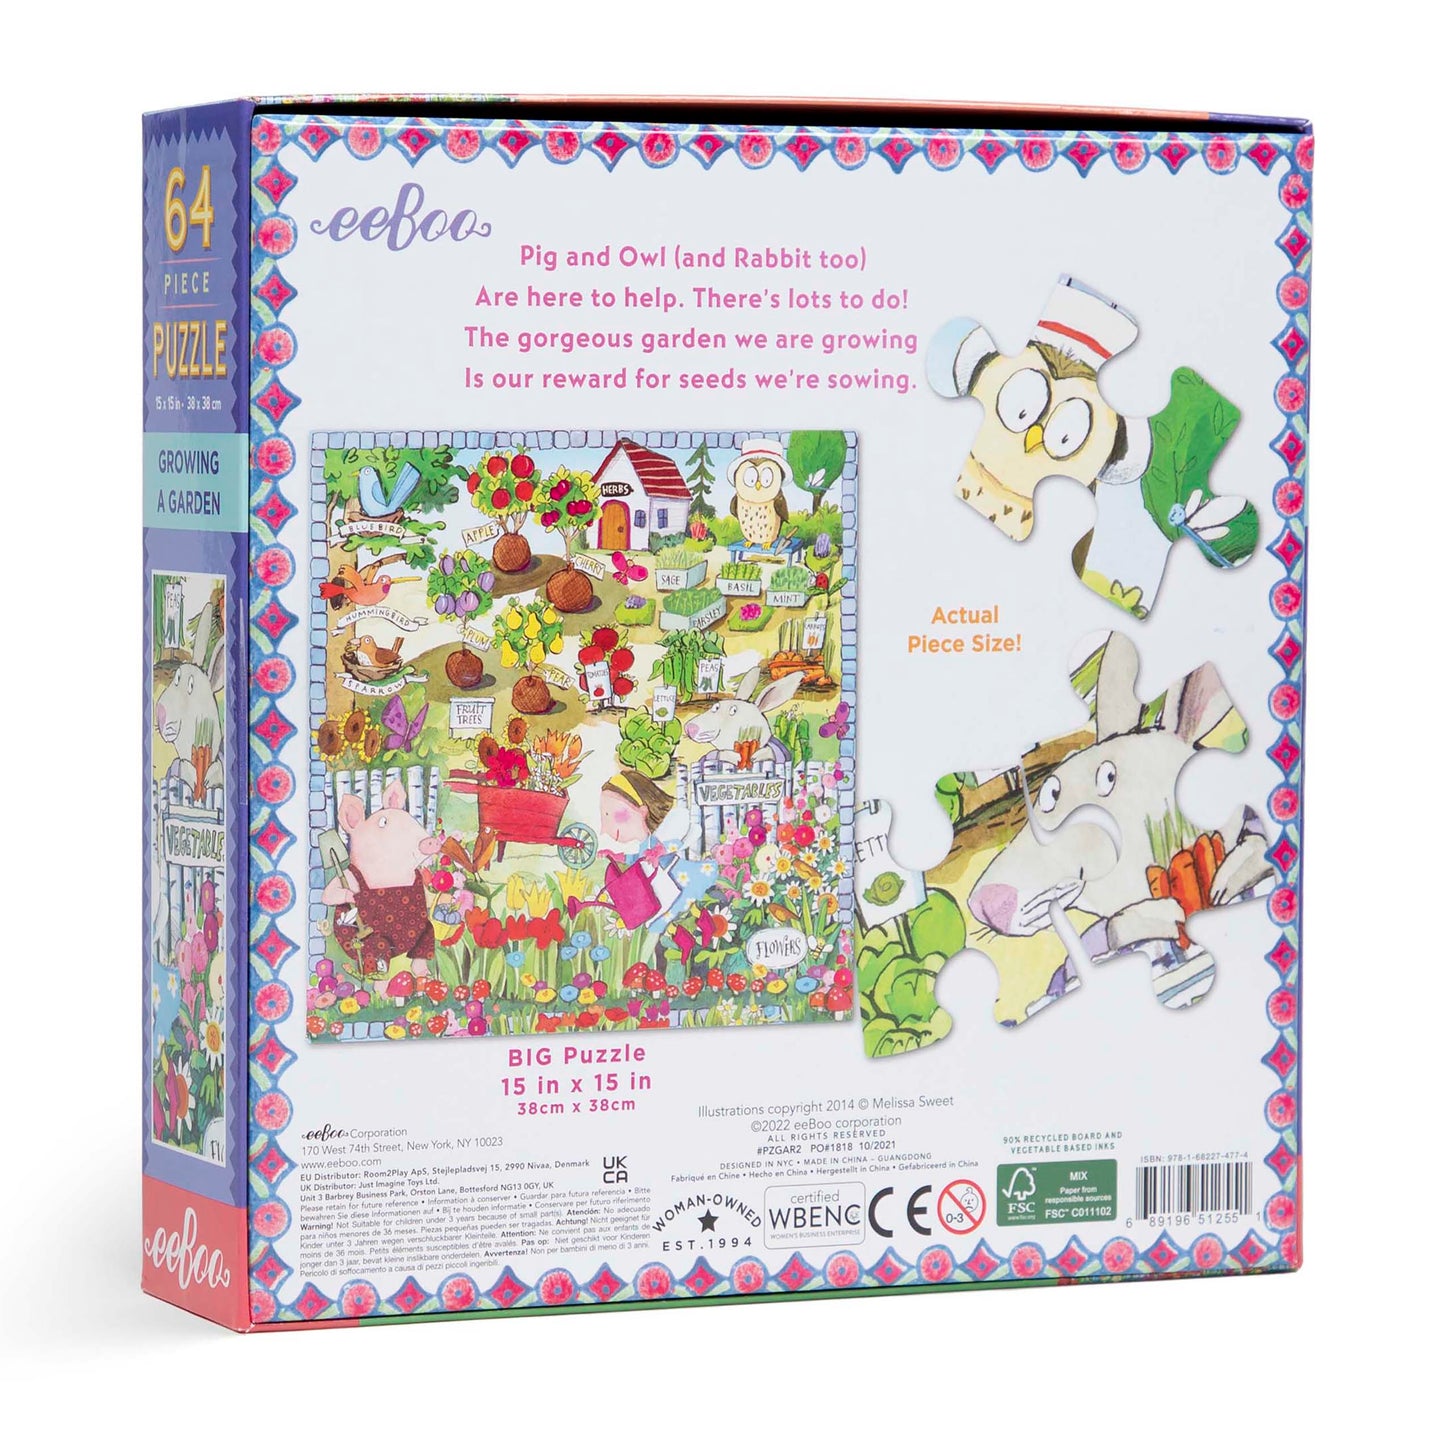 Growing a Garden 64 Piece Nature Jigsaw Puzzle | eeBoo Large Piece Puzzles | Cute Gifts for Kids 5+